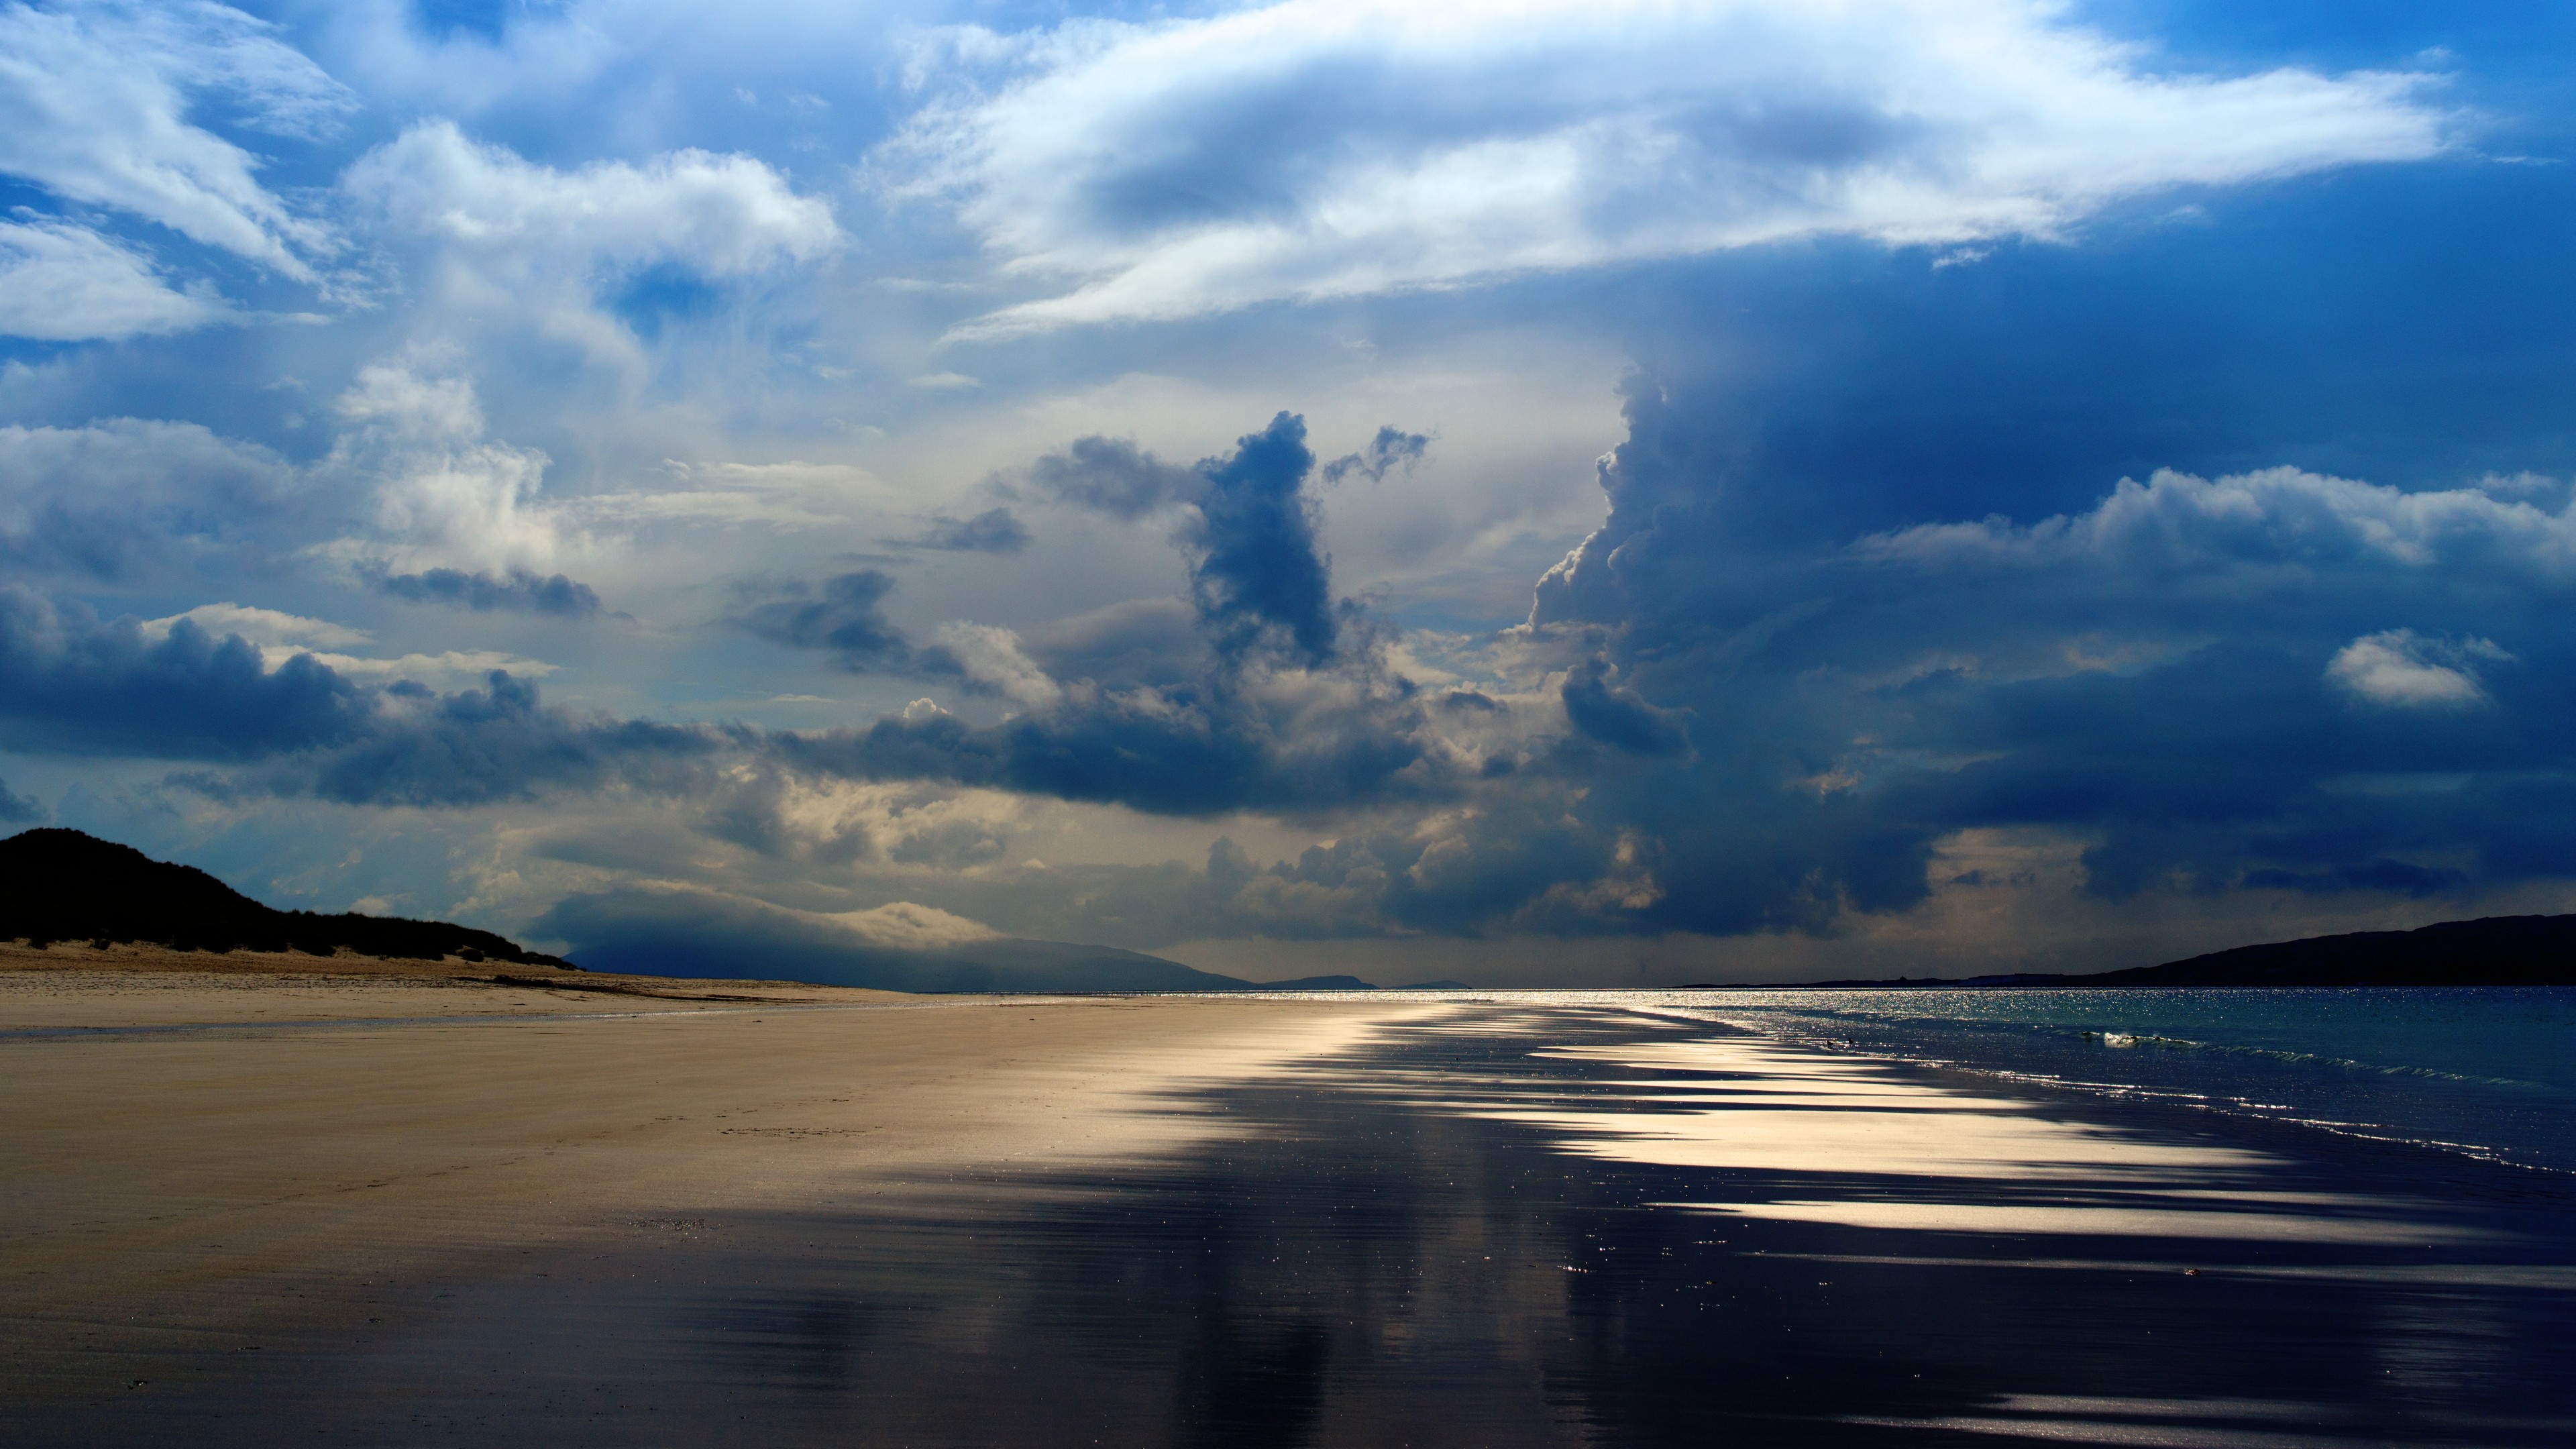 General 3840x2160 sea Pacific Ocean mountains evening clouds sky beach reflection nature landscape photography